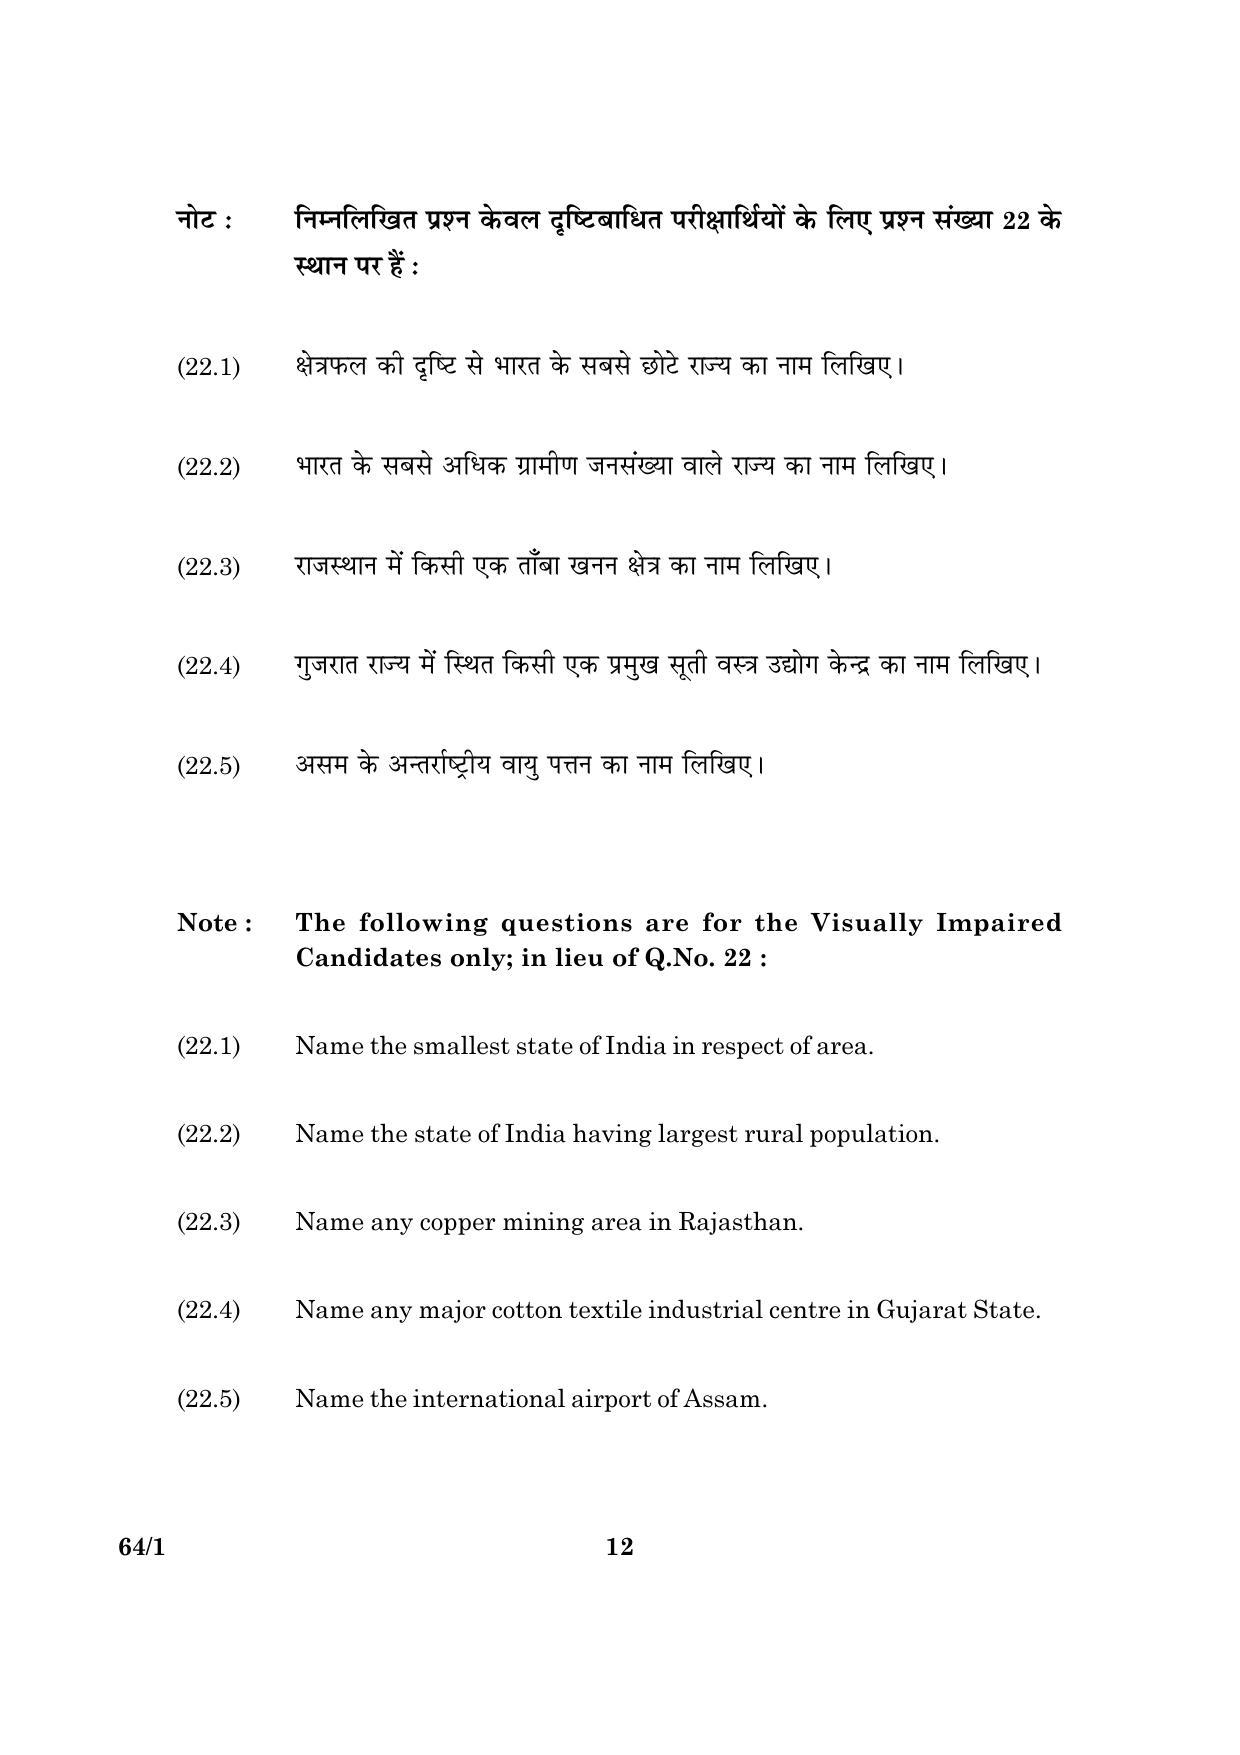 CBSE Class 12 064 Set 1 Geography 2016 Question Paper - Page 12